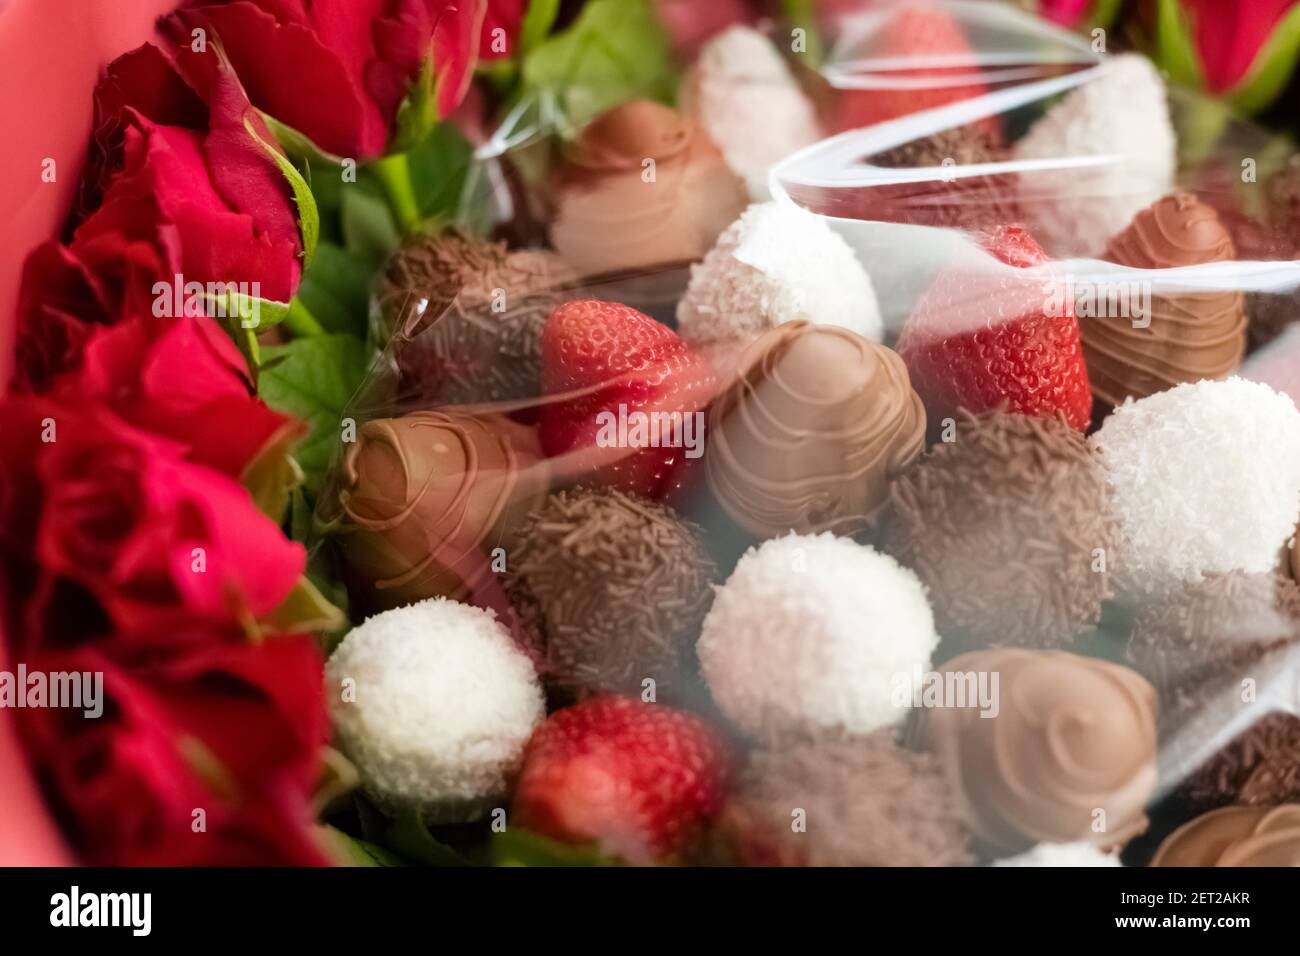 fresh strawberries covered with chocolate and coconut. Stock Photo